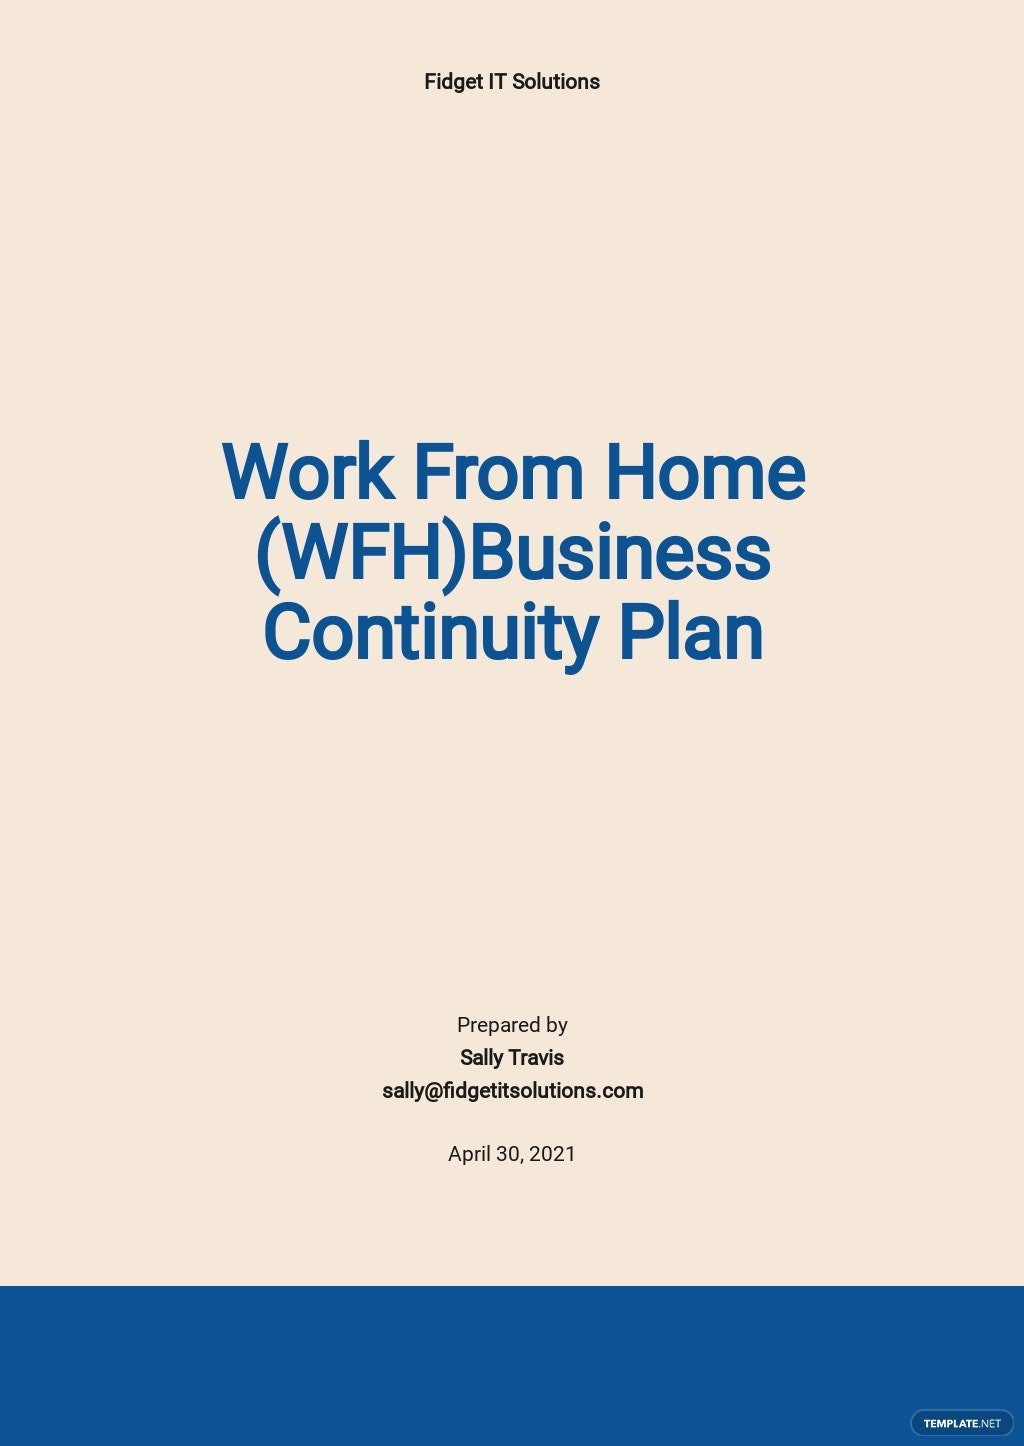 work from home business continuity plan template